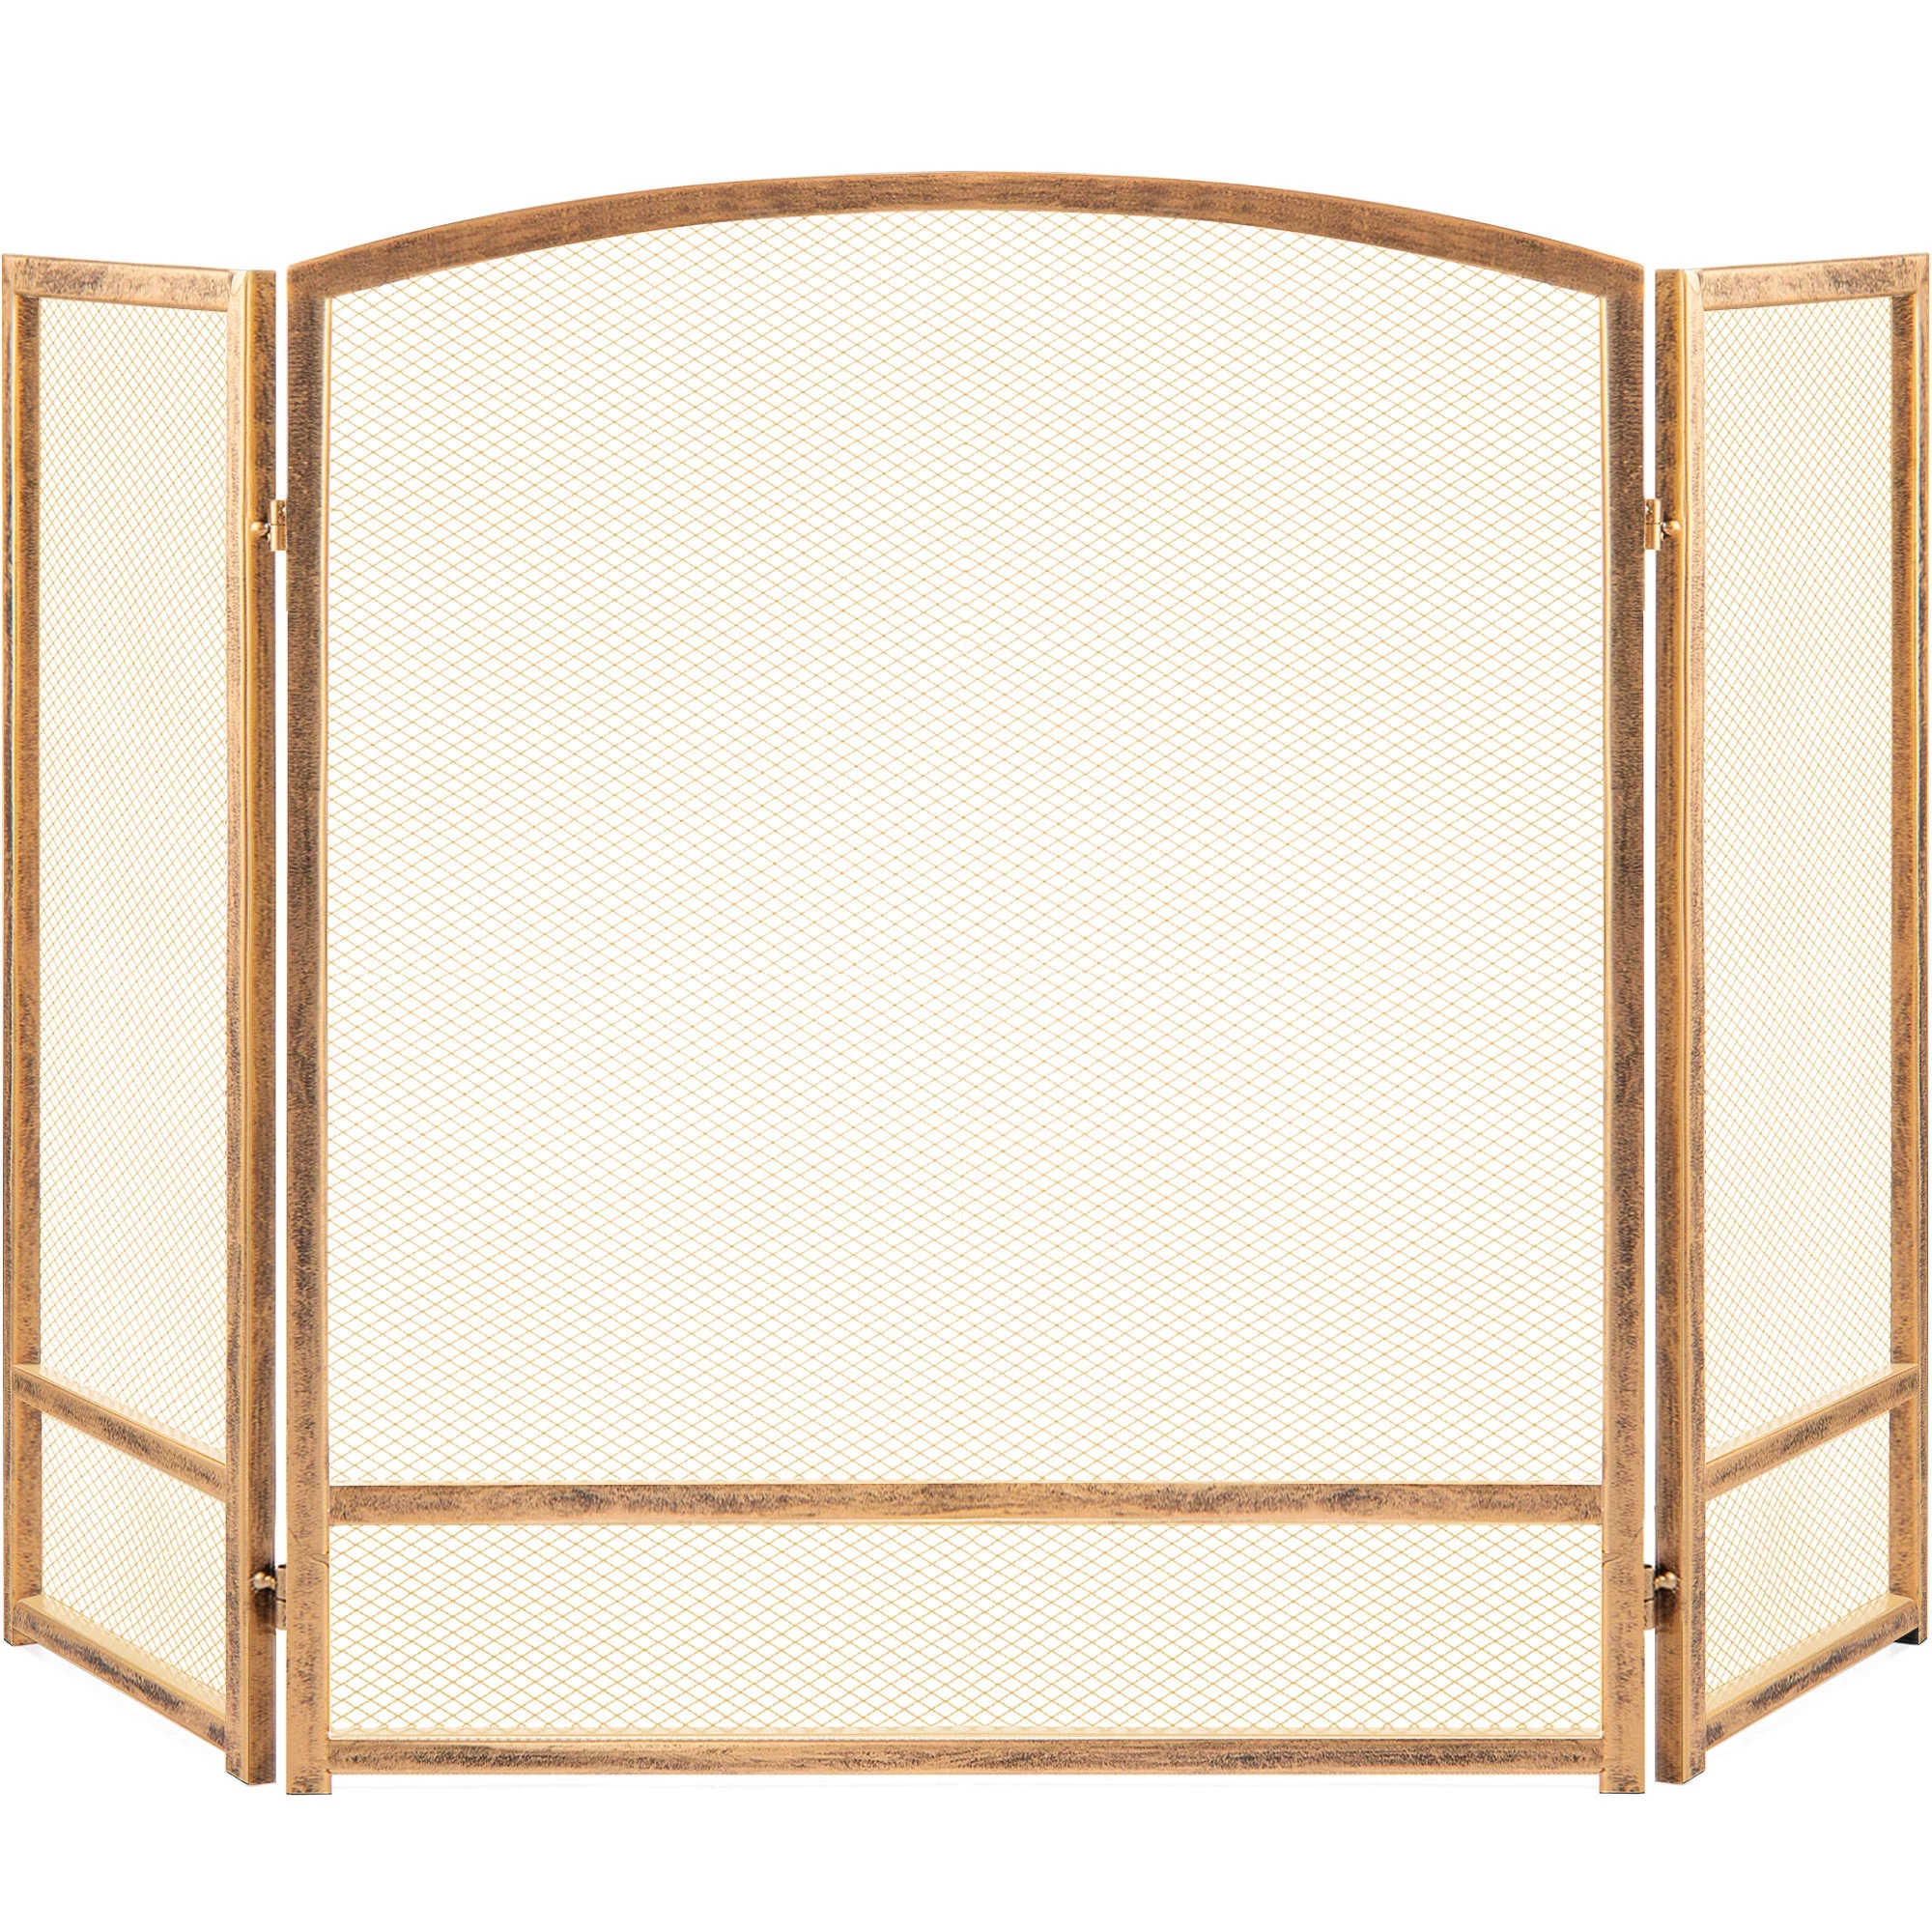 Best Choice Products 47x29in 3-Panel Steel Mesh Fireplace Screen, Spark Guard w/ Rustic Worn Finish - Antique Gold